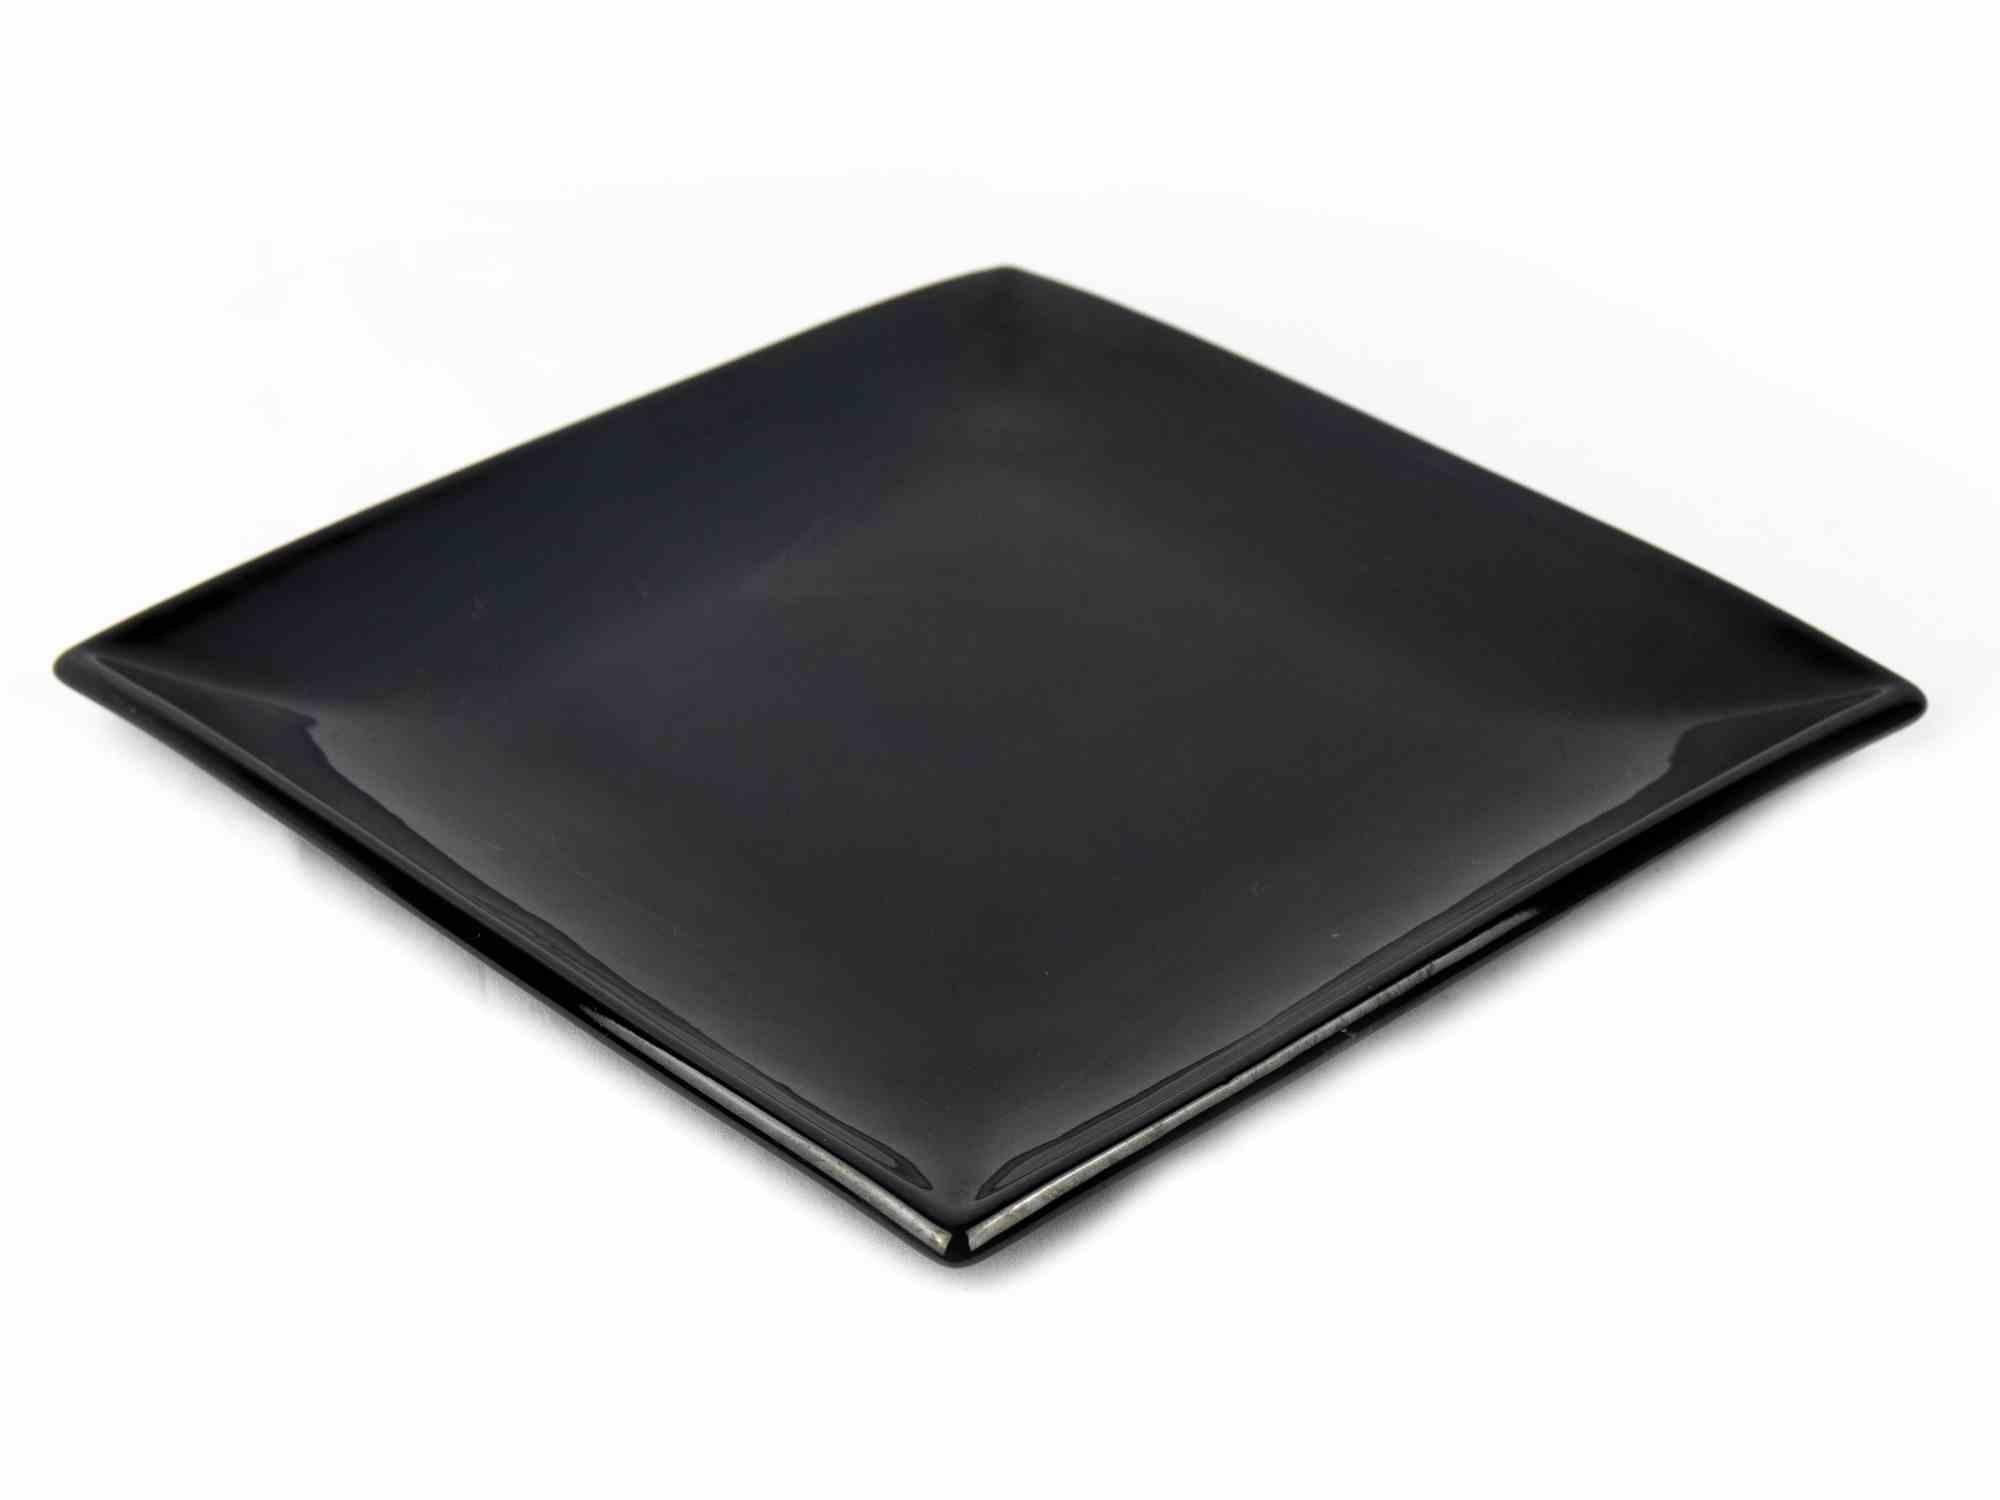 Black porcelain plate is an original decorative object realized in the 1970s.

A very elegant porcelain plate black colored realized by Olympia Porcelain (as reported under the base).

Good conditions except for some light scratches.